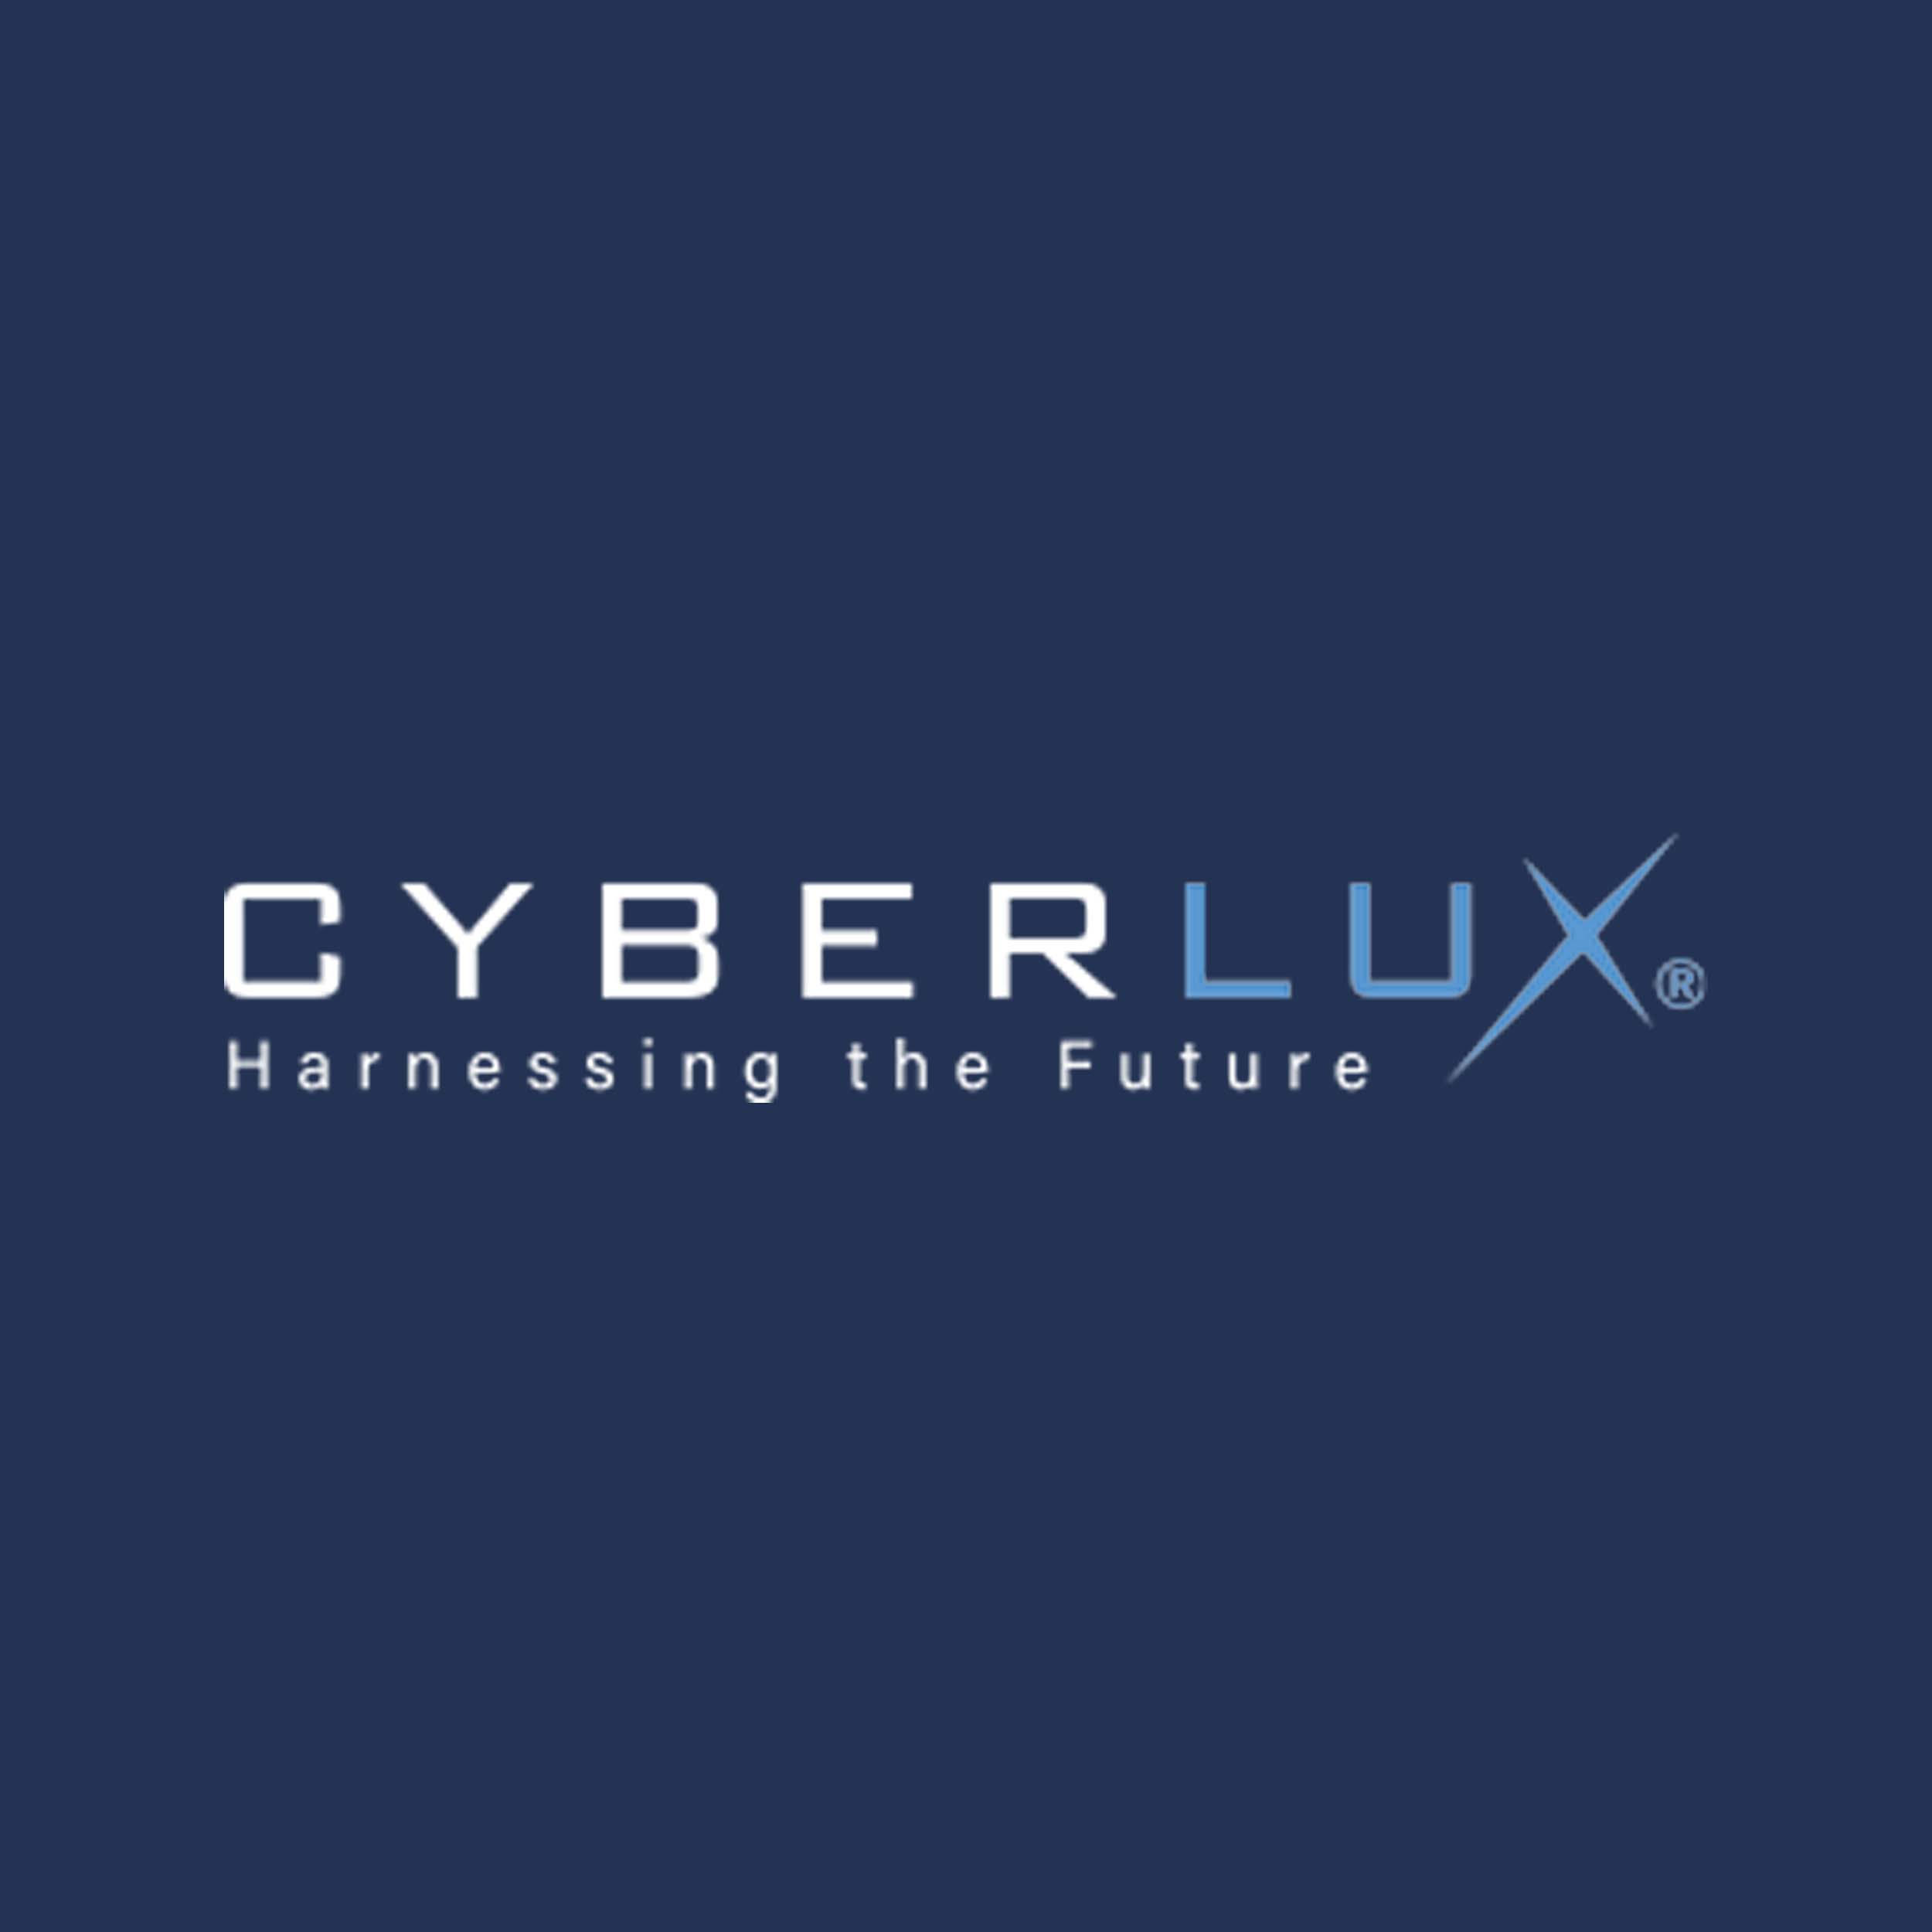 Cyberlux Corp. Stock Is Red-Hot, Surges 105% Since March After Posting Record-Setting Revenues And $44 Million 2022 Guidance ($CYBL)